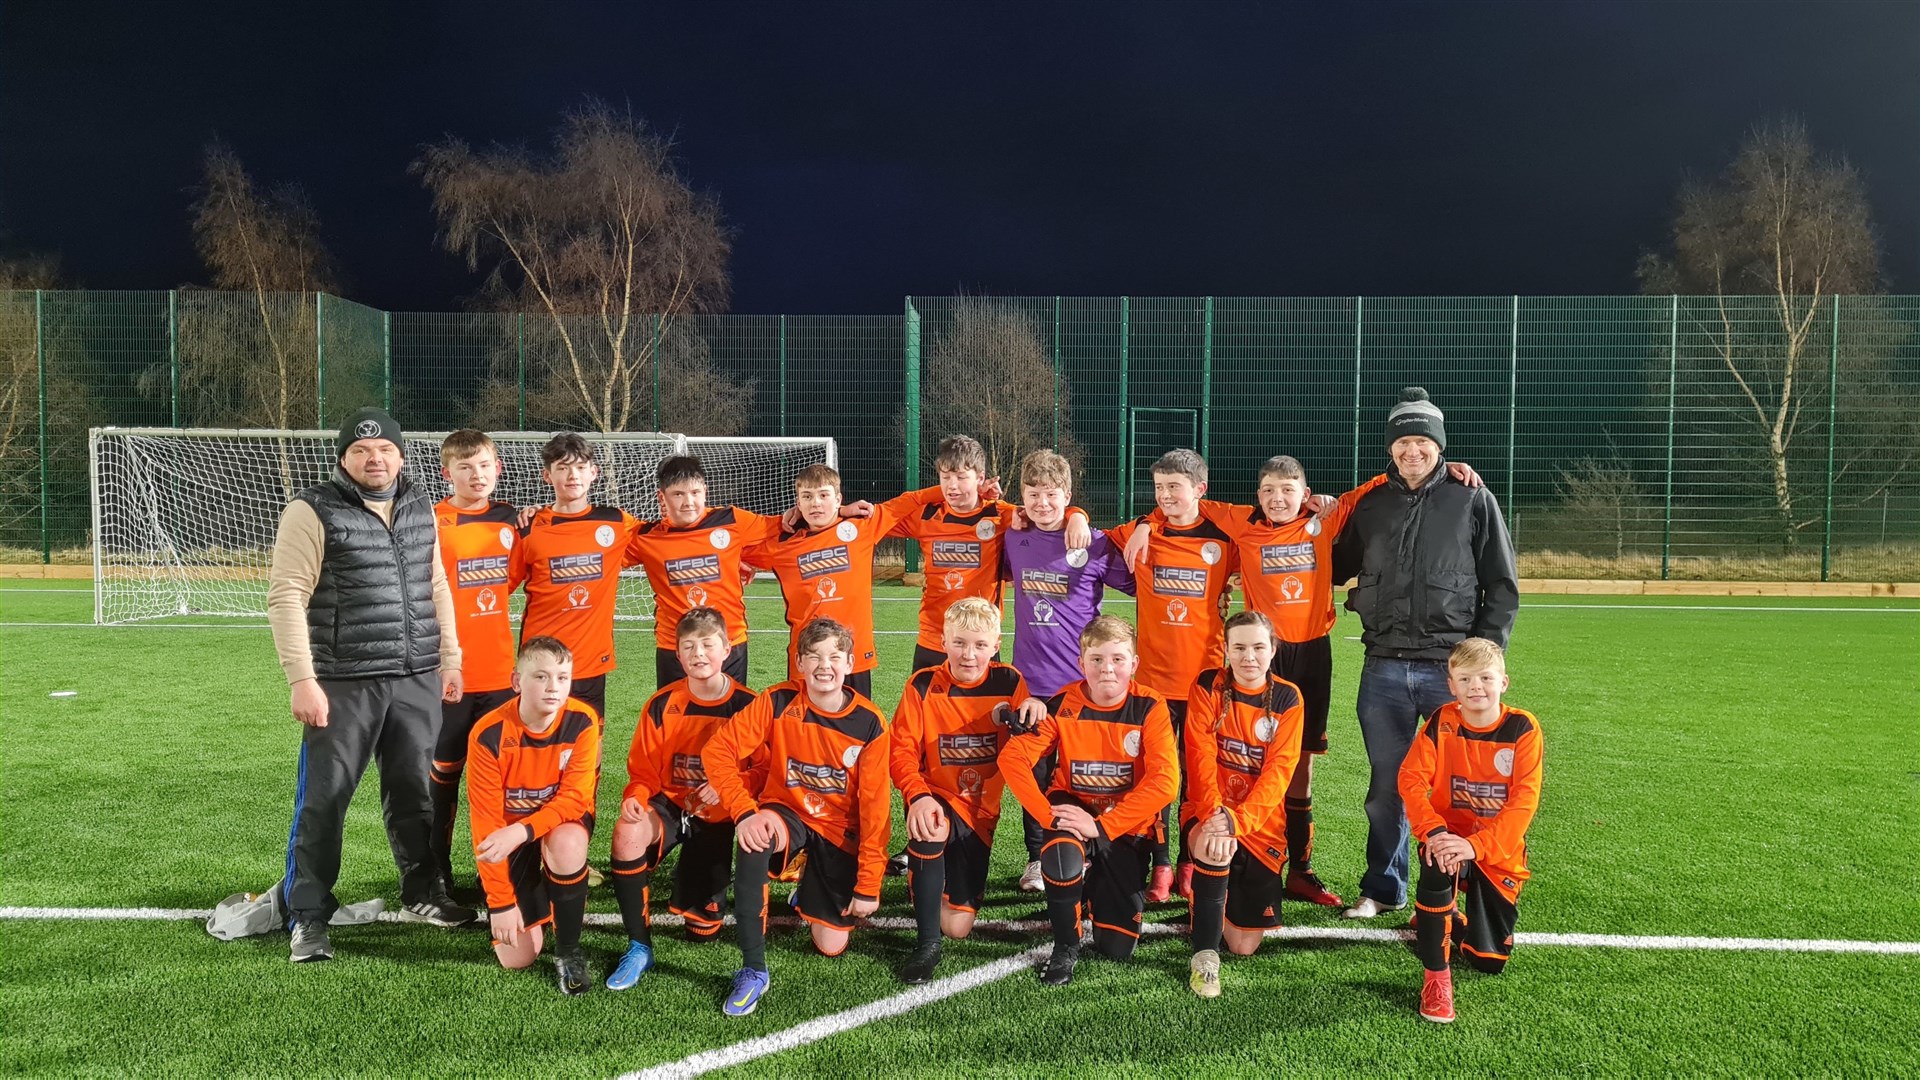 Strathspey Rovers U14 squad with coaches John Paterson and Andrew MacLeod.